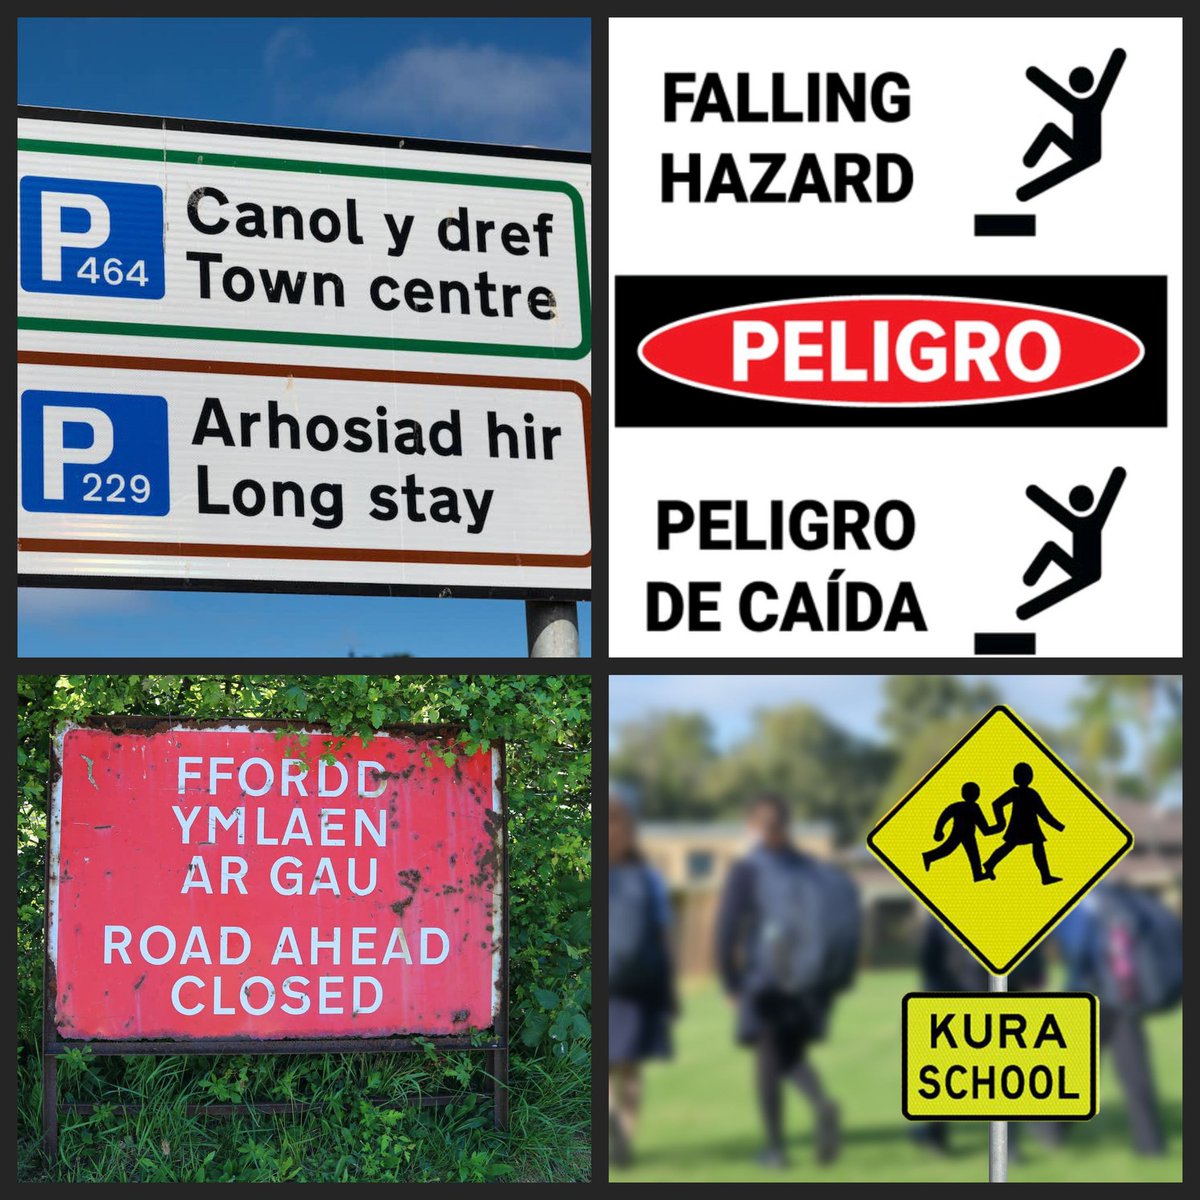 How easily confused ARE right-whinge supporters, who can't navigate around bilingual signs? How on Earth, do they function overseas with international bilingualism in signage? We must have the most unintelligent compatriots who see English AND Te reo, then fall apart. Seriously.